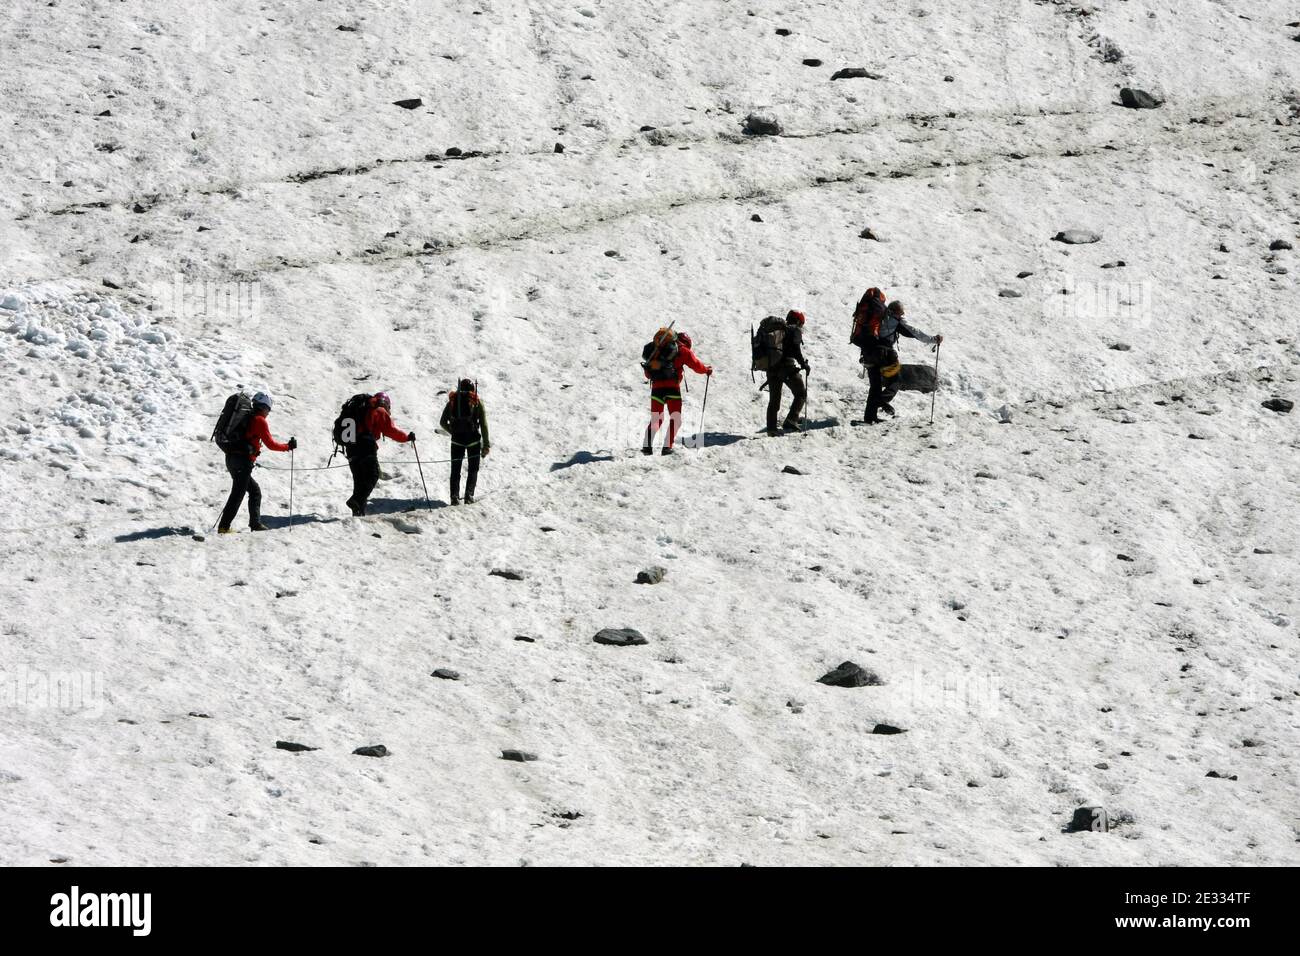 French engineers began an operation to remove 65,000 cubic meters of water underneath the Tete-Rousse glacier on Mont Blanc, in Saint-Gervais, southeastern France on August 25, 2010. The hidden lake threatens to flood the Saint-Gervais valley, a tourist destination and home to 3,000 people in the French Alps. The engineers are drilling a hole into the ice to pump out the water. In 1892, water from an underground lake flooded the same valley and killed 175 people. Photo by Daniel Giry/ABACAPRESS.COM. Stock Photo